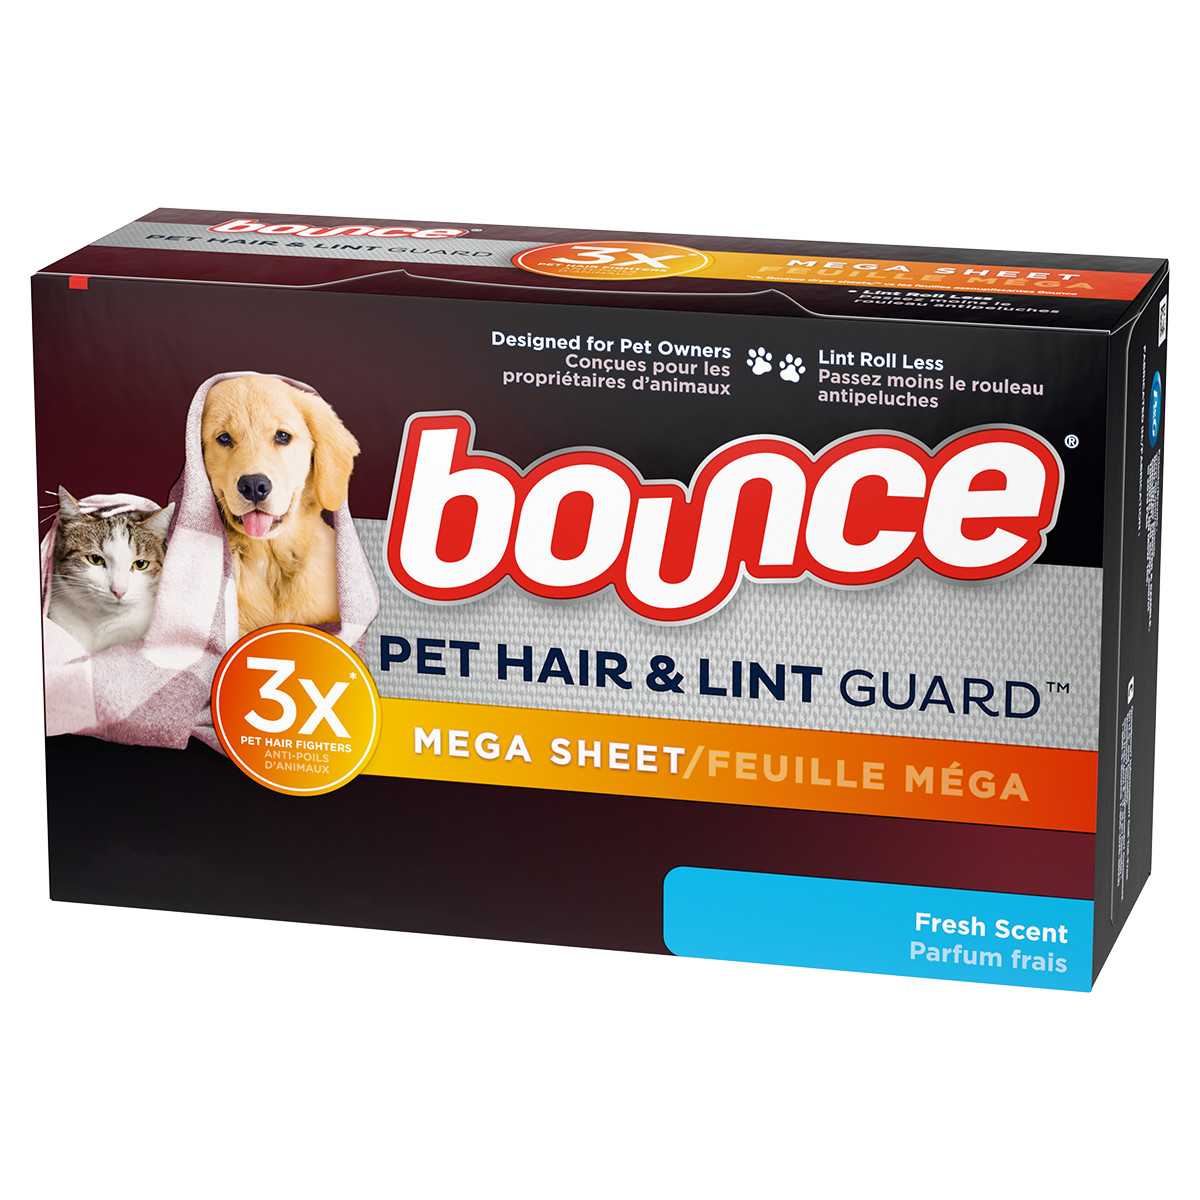 Bounce Pet Hair and Lint Guard Mega Dryer Sheets with 3X Pet Hair Fighters